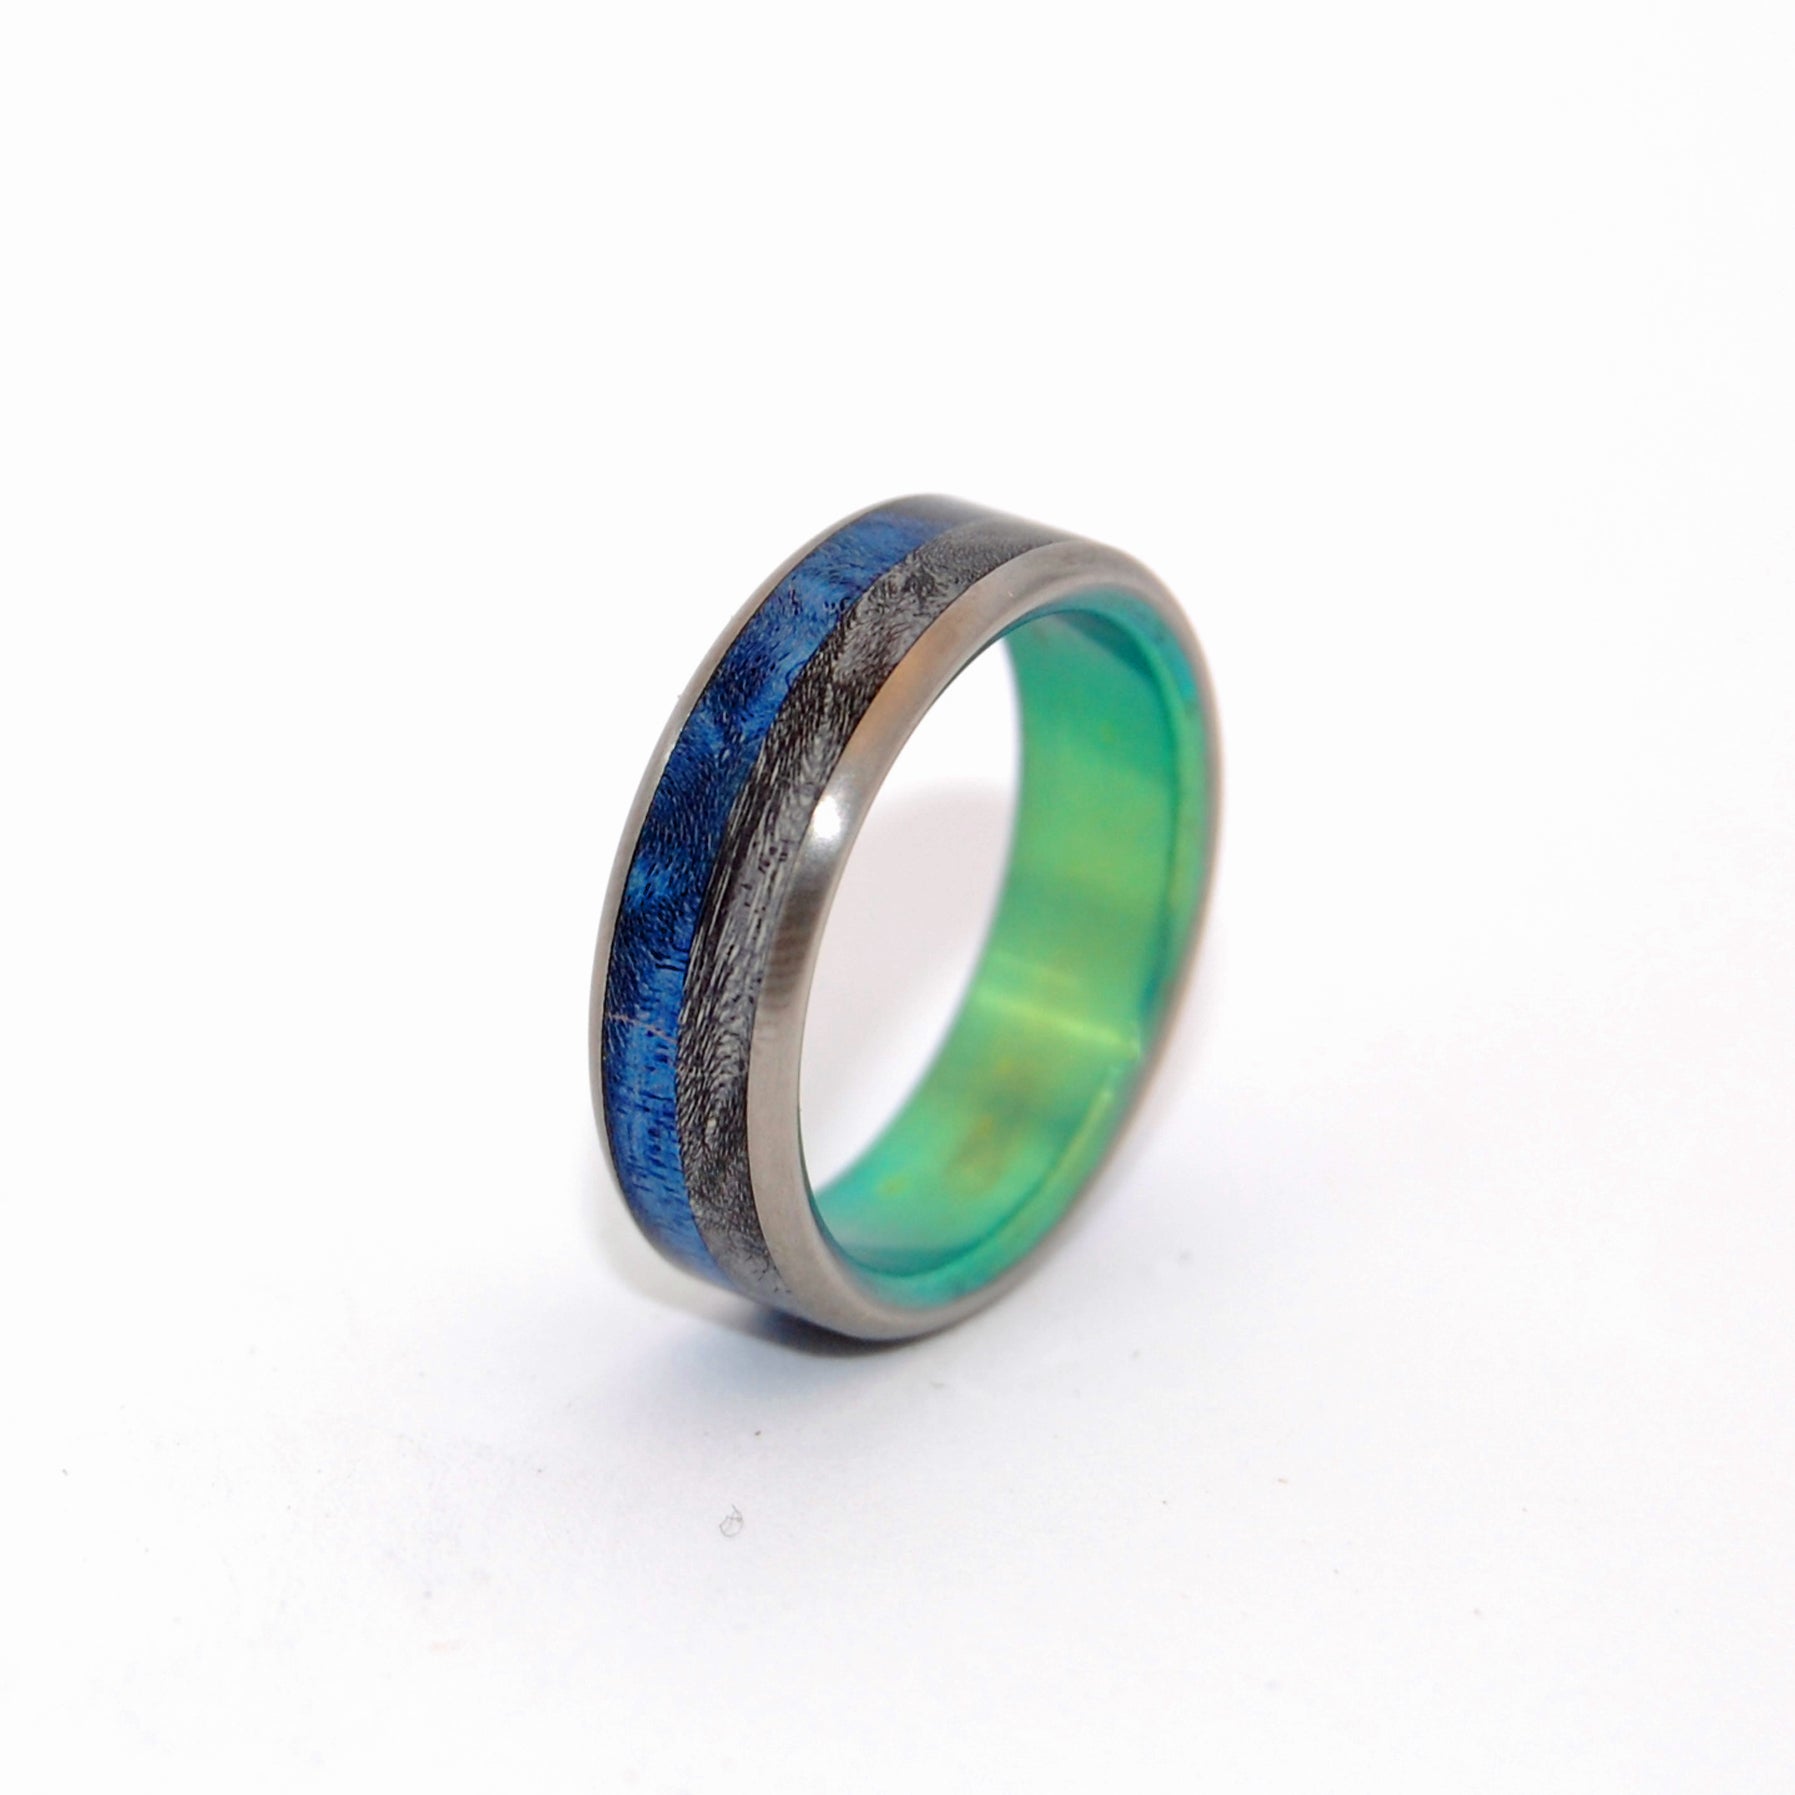 With You | Wood and Titanium Wedding Ring - Minter and Richter Designs